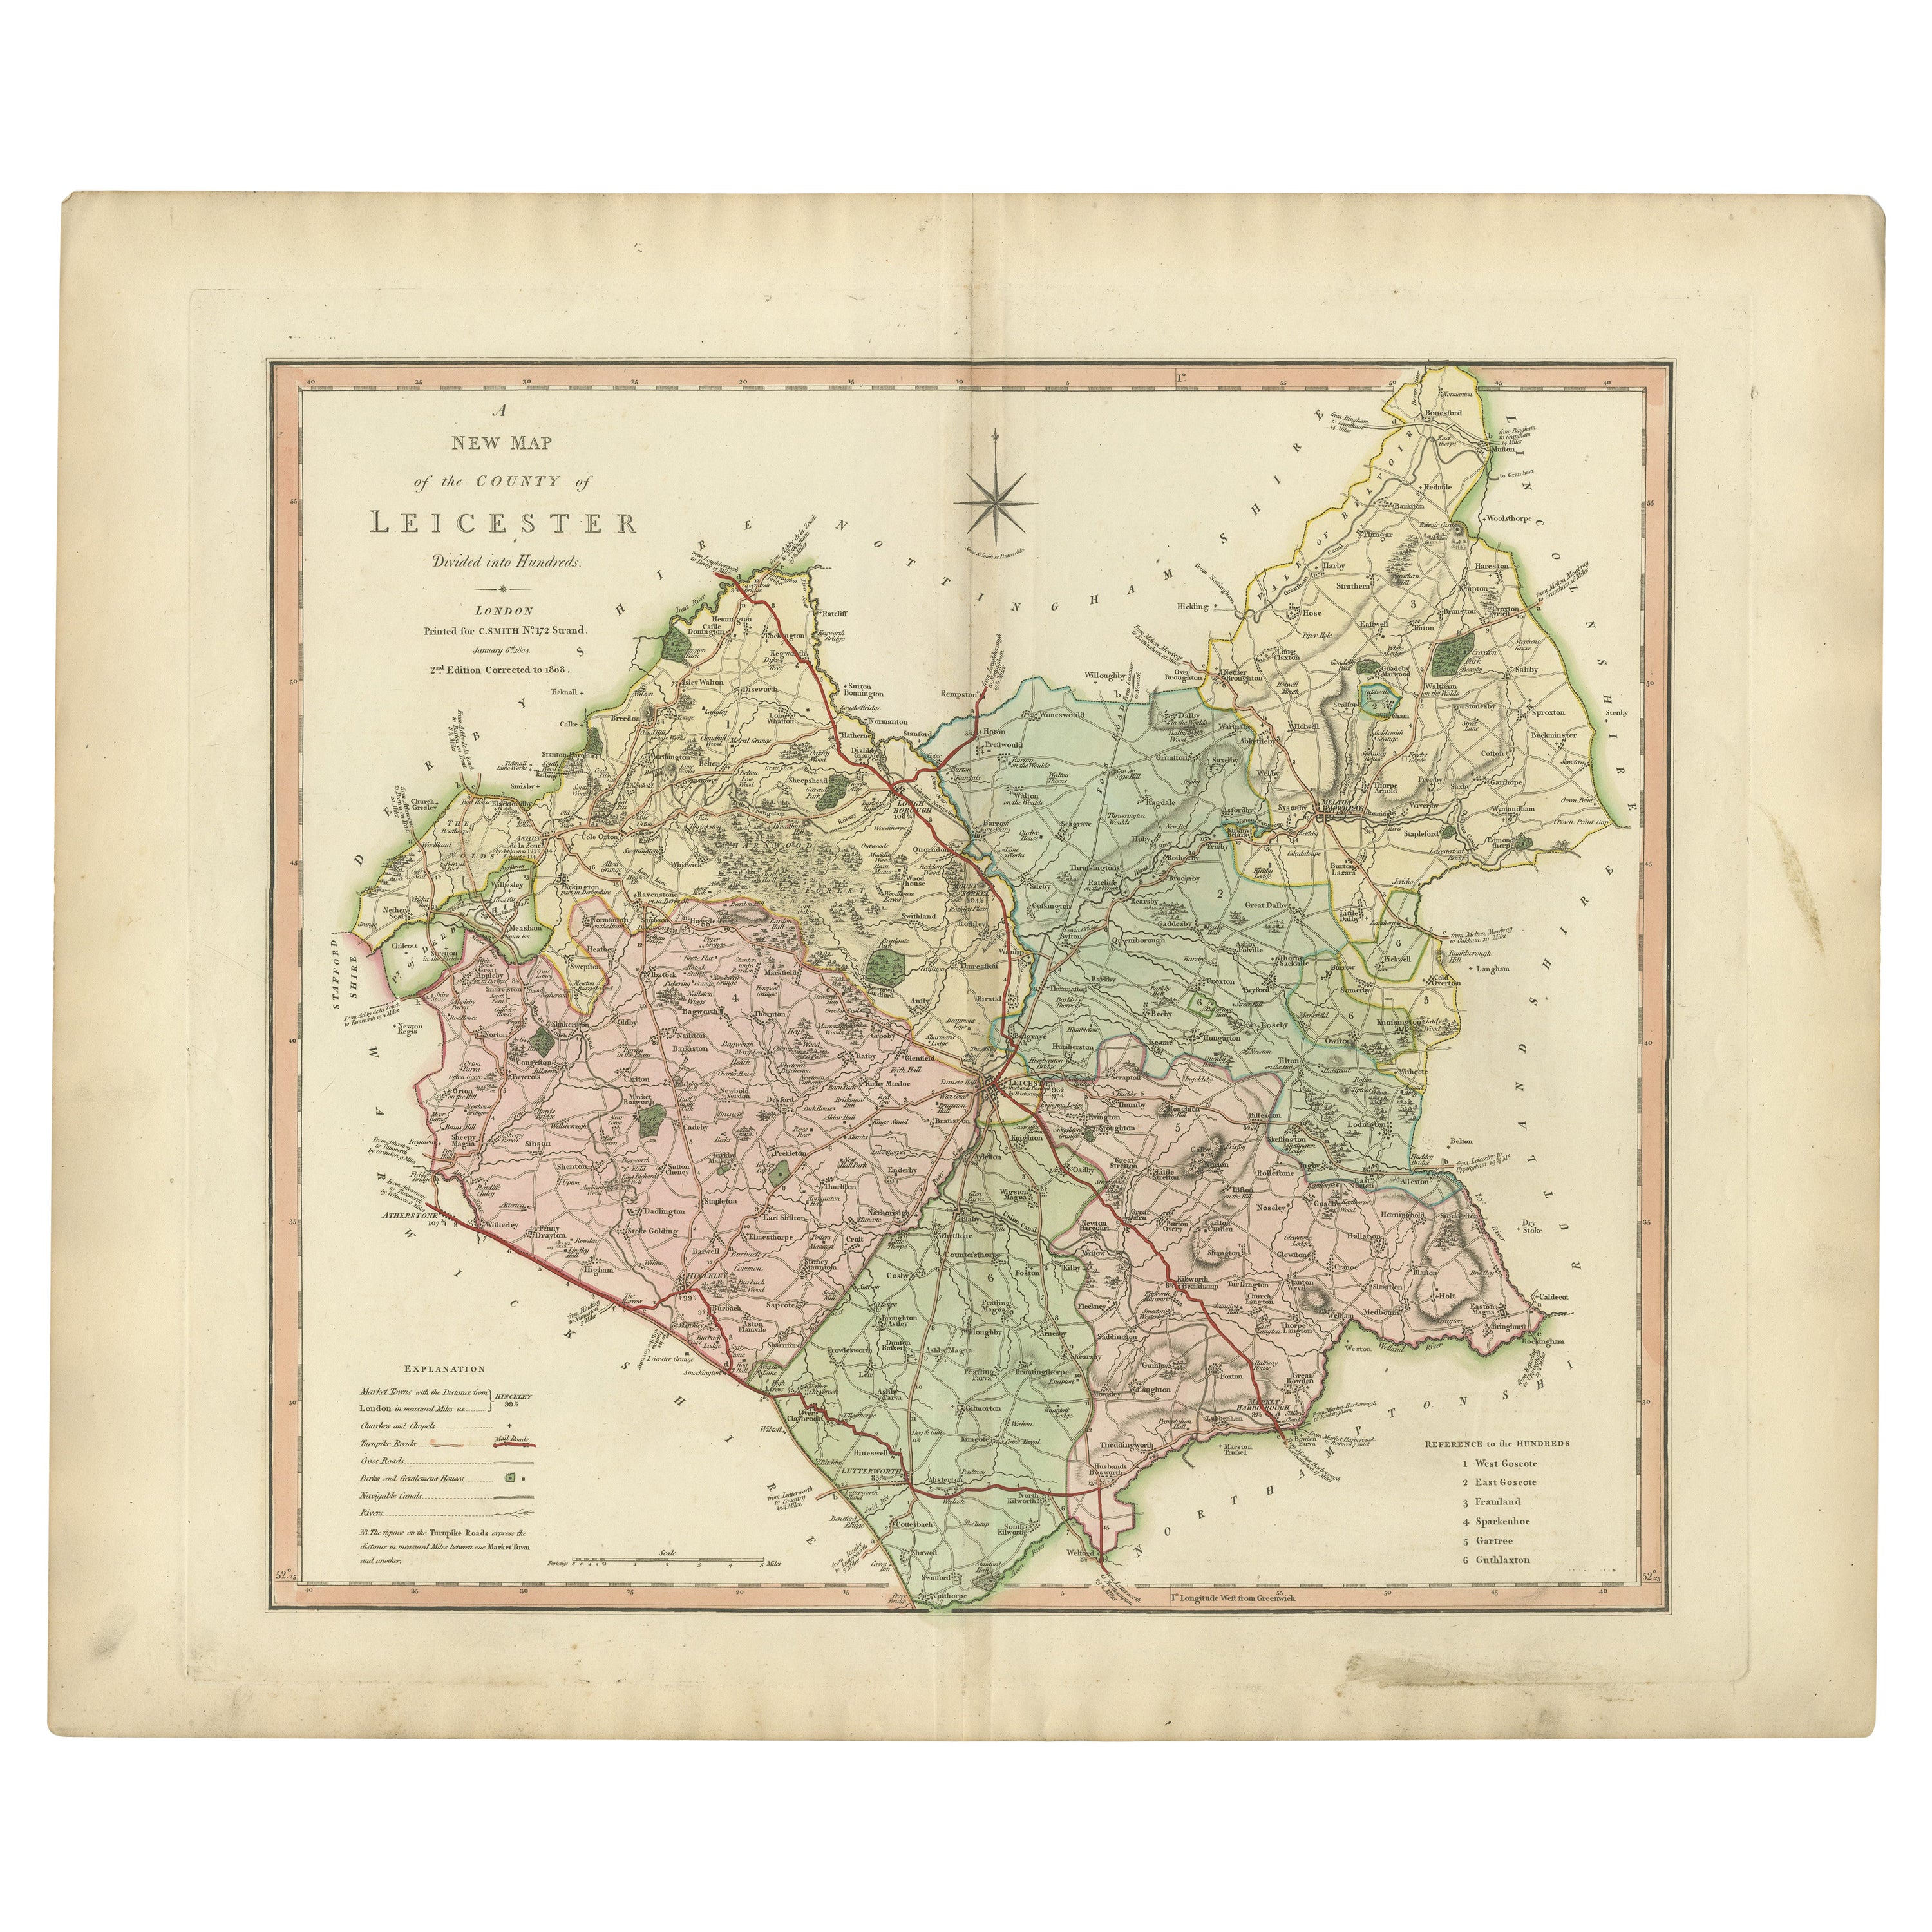 Antique County Map of Leicestershire, England, 1804